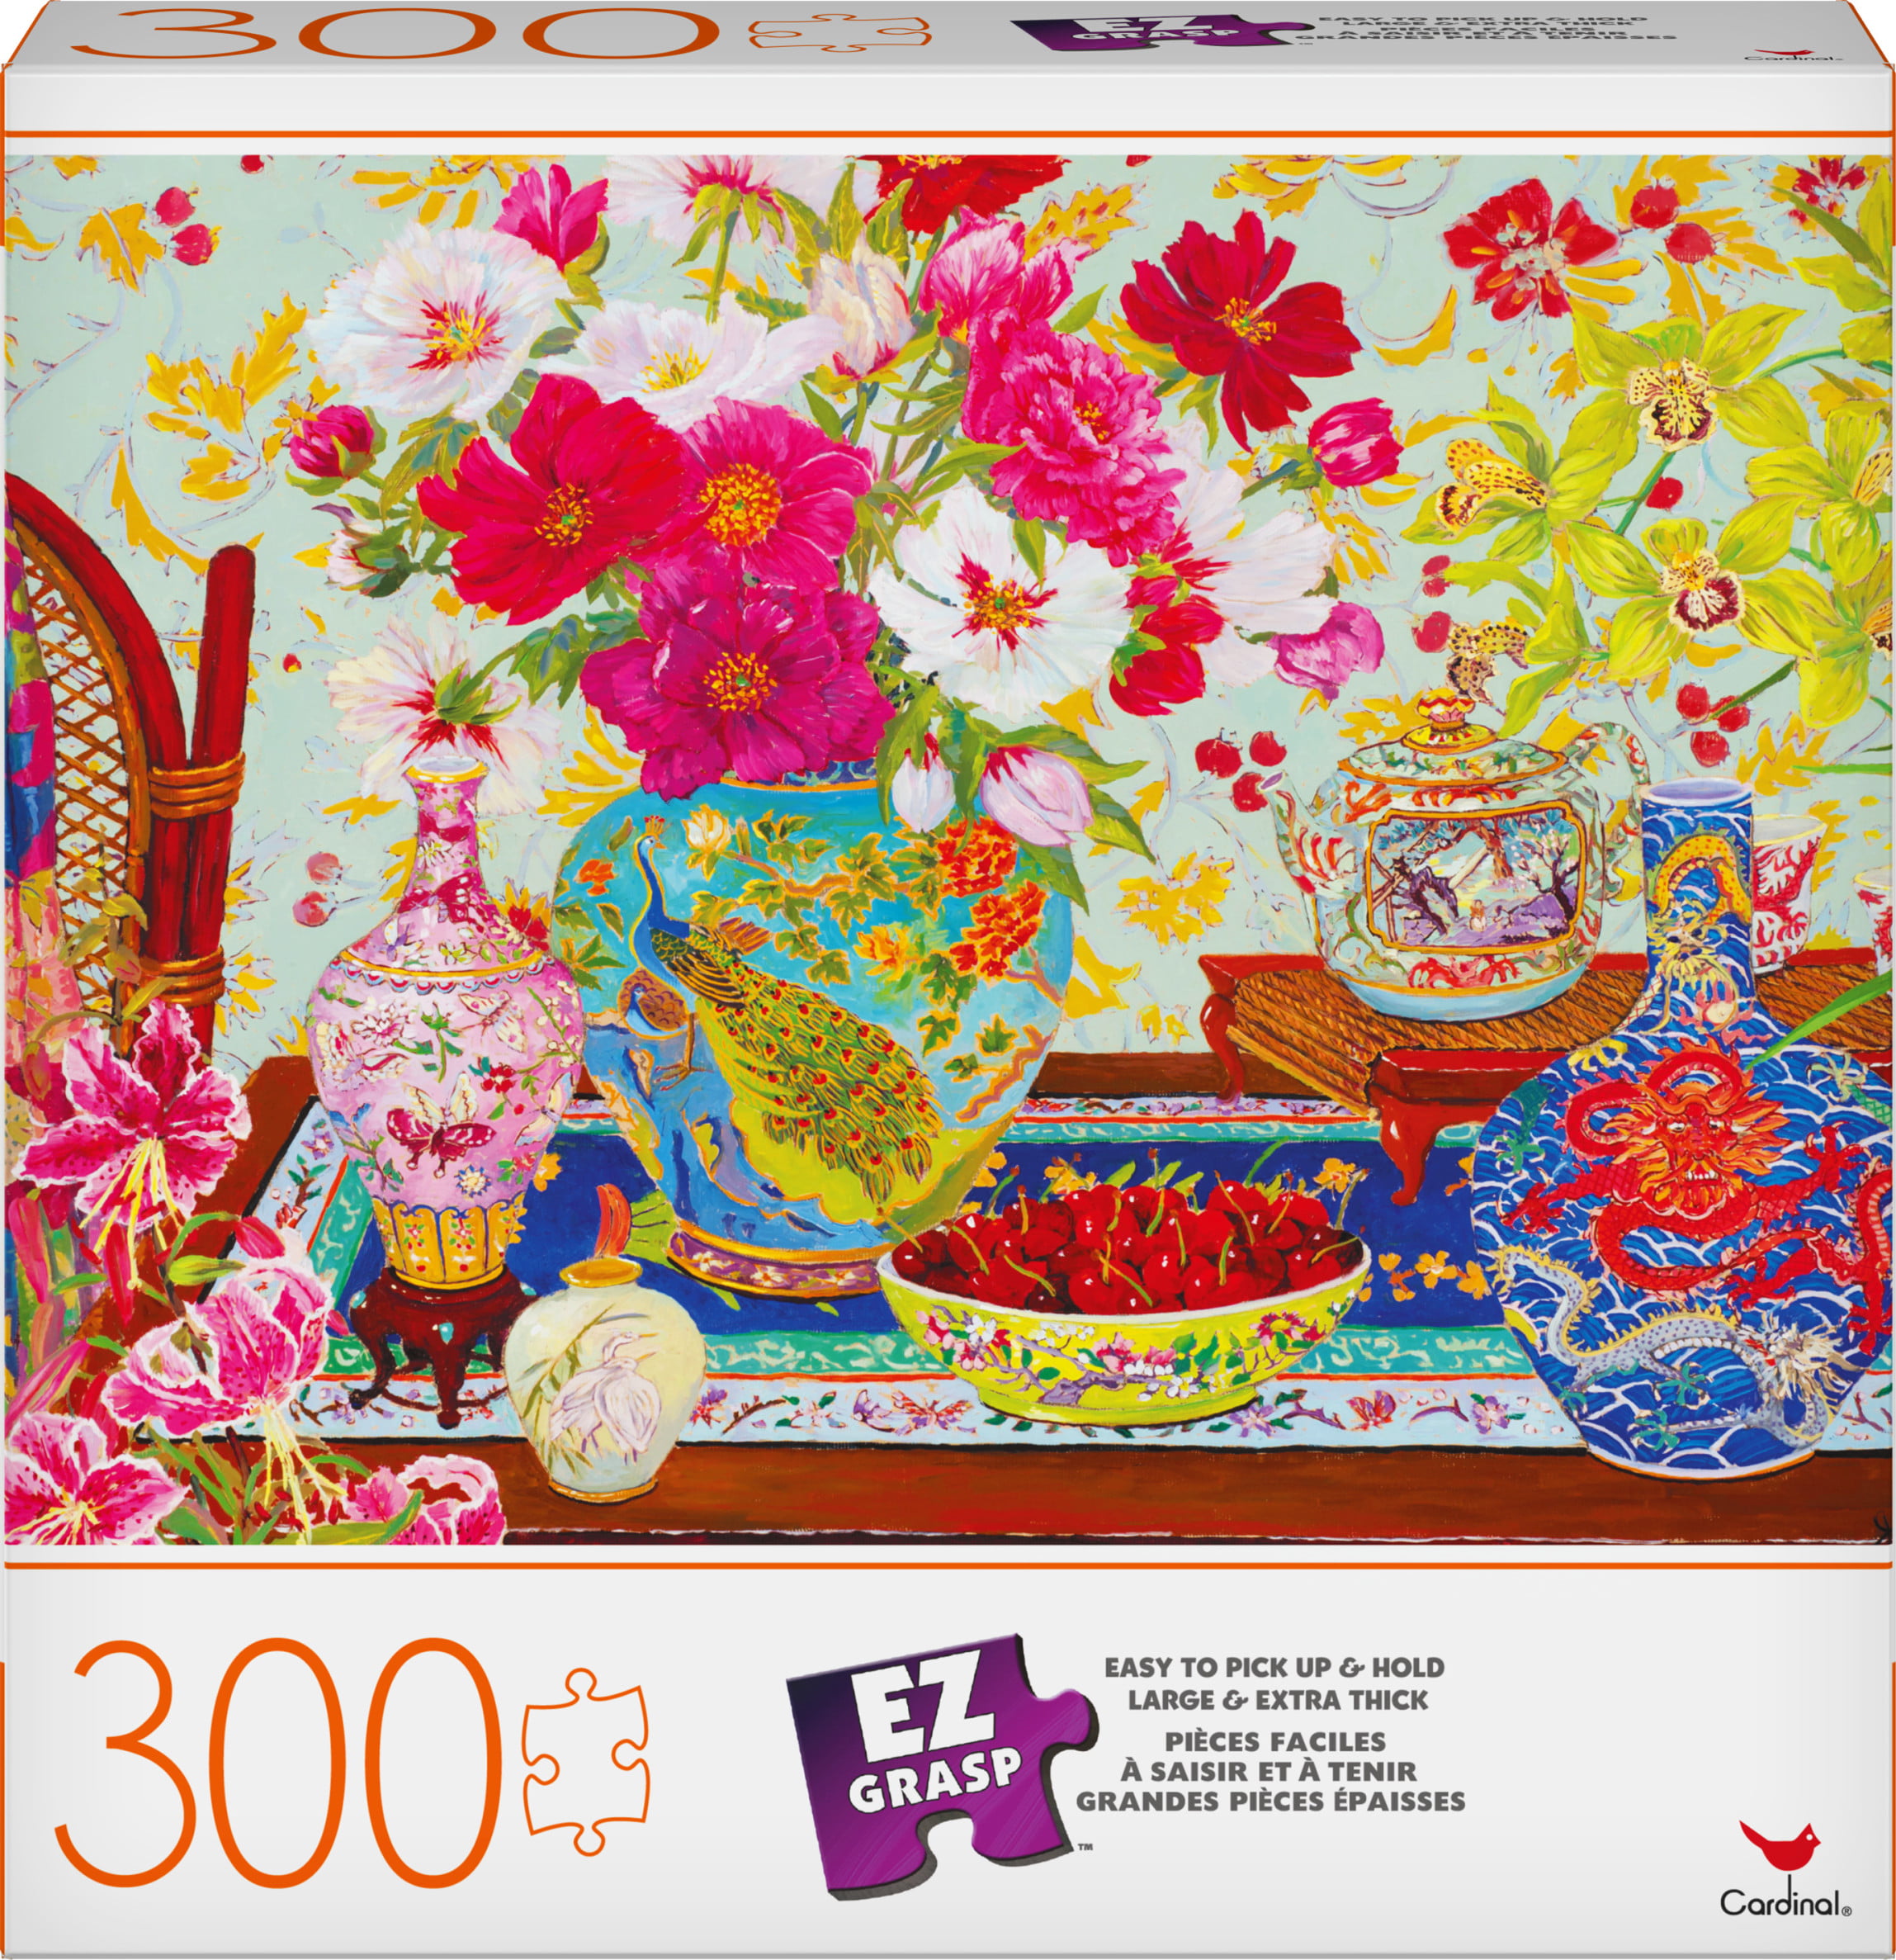 Jigsaw Puzzles 3000 Pieces for Adults for Kids Landscape-3000 Wooden igsaw Puzzles 3000 Pieces for Adults Family Friends Unique Birthday Present Suitable for Teenagers and Adults